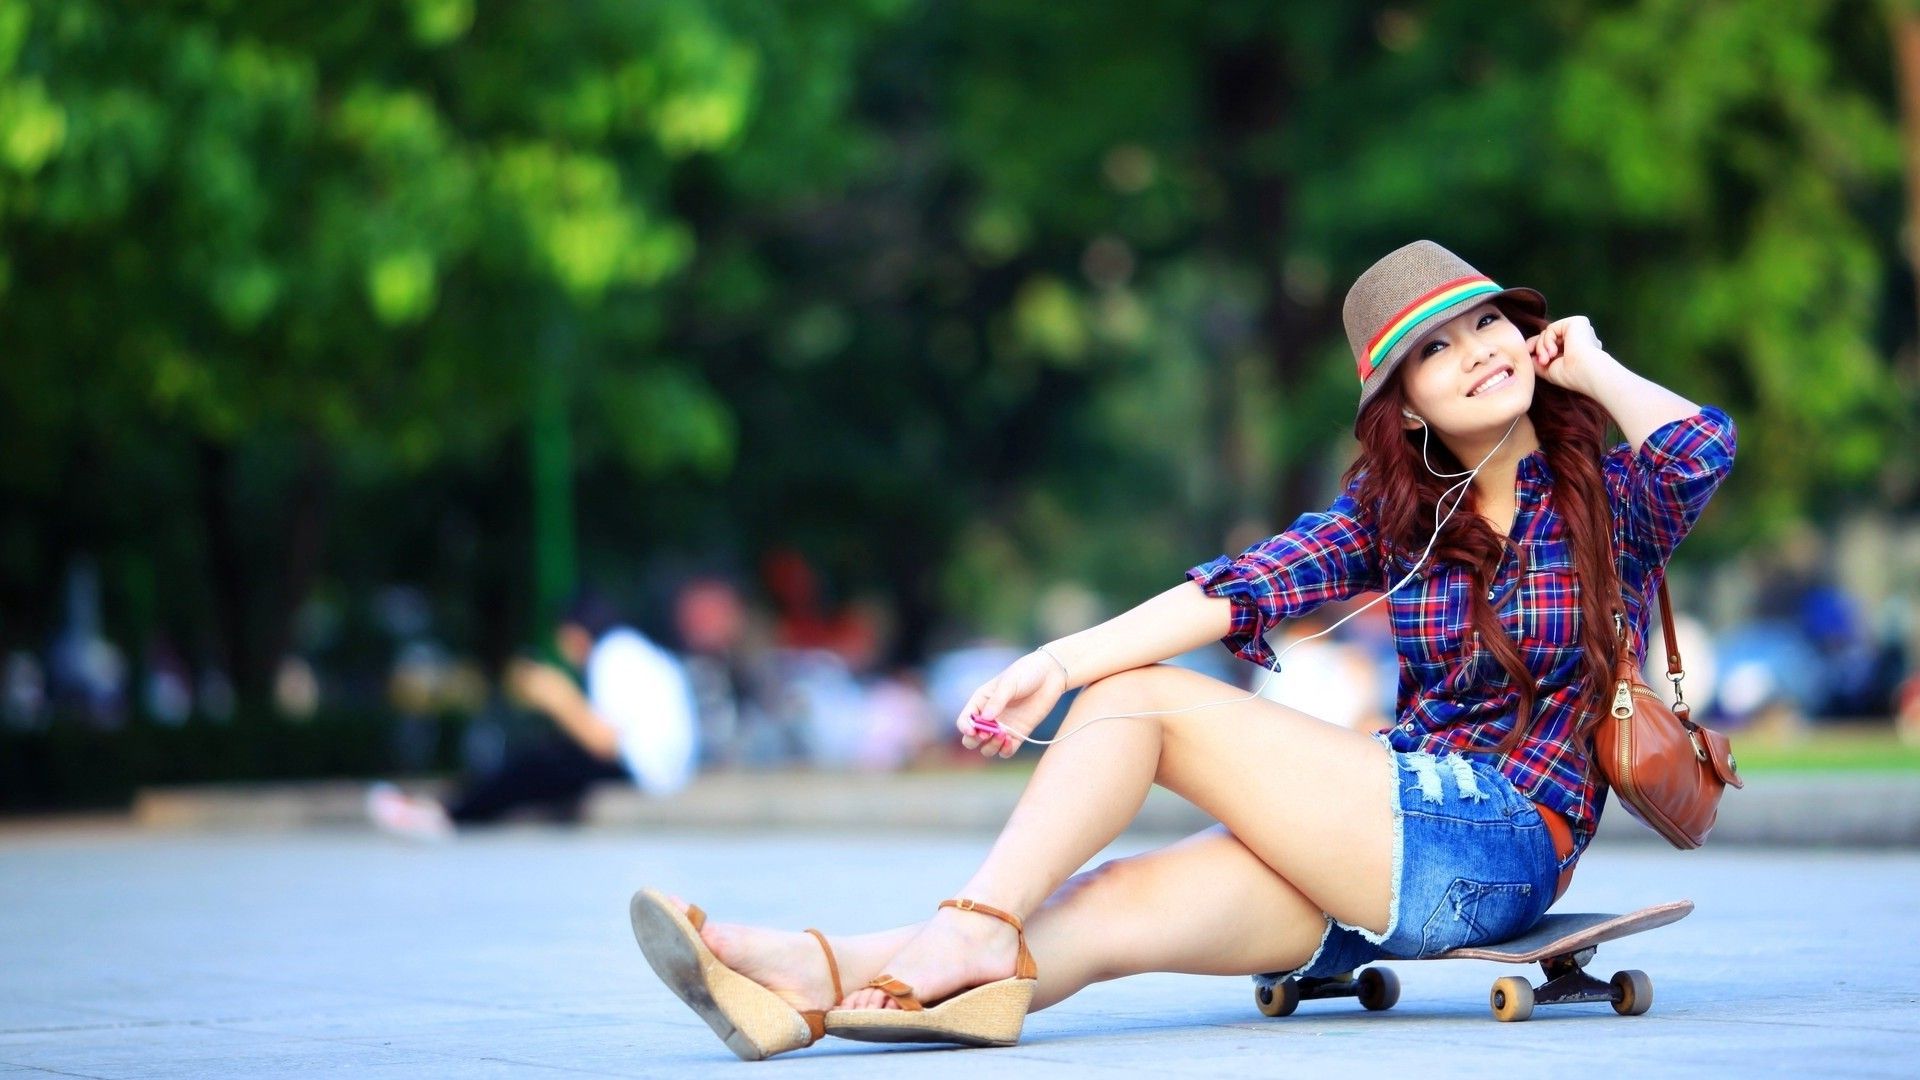 Asian, Skateboard, Women, Smiling, Wedge Shoes, Feet, Toes Wallpaper HD / Desktop and Mobile Background